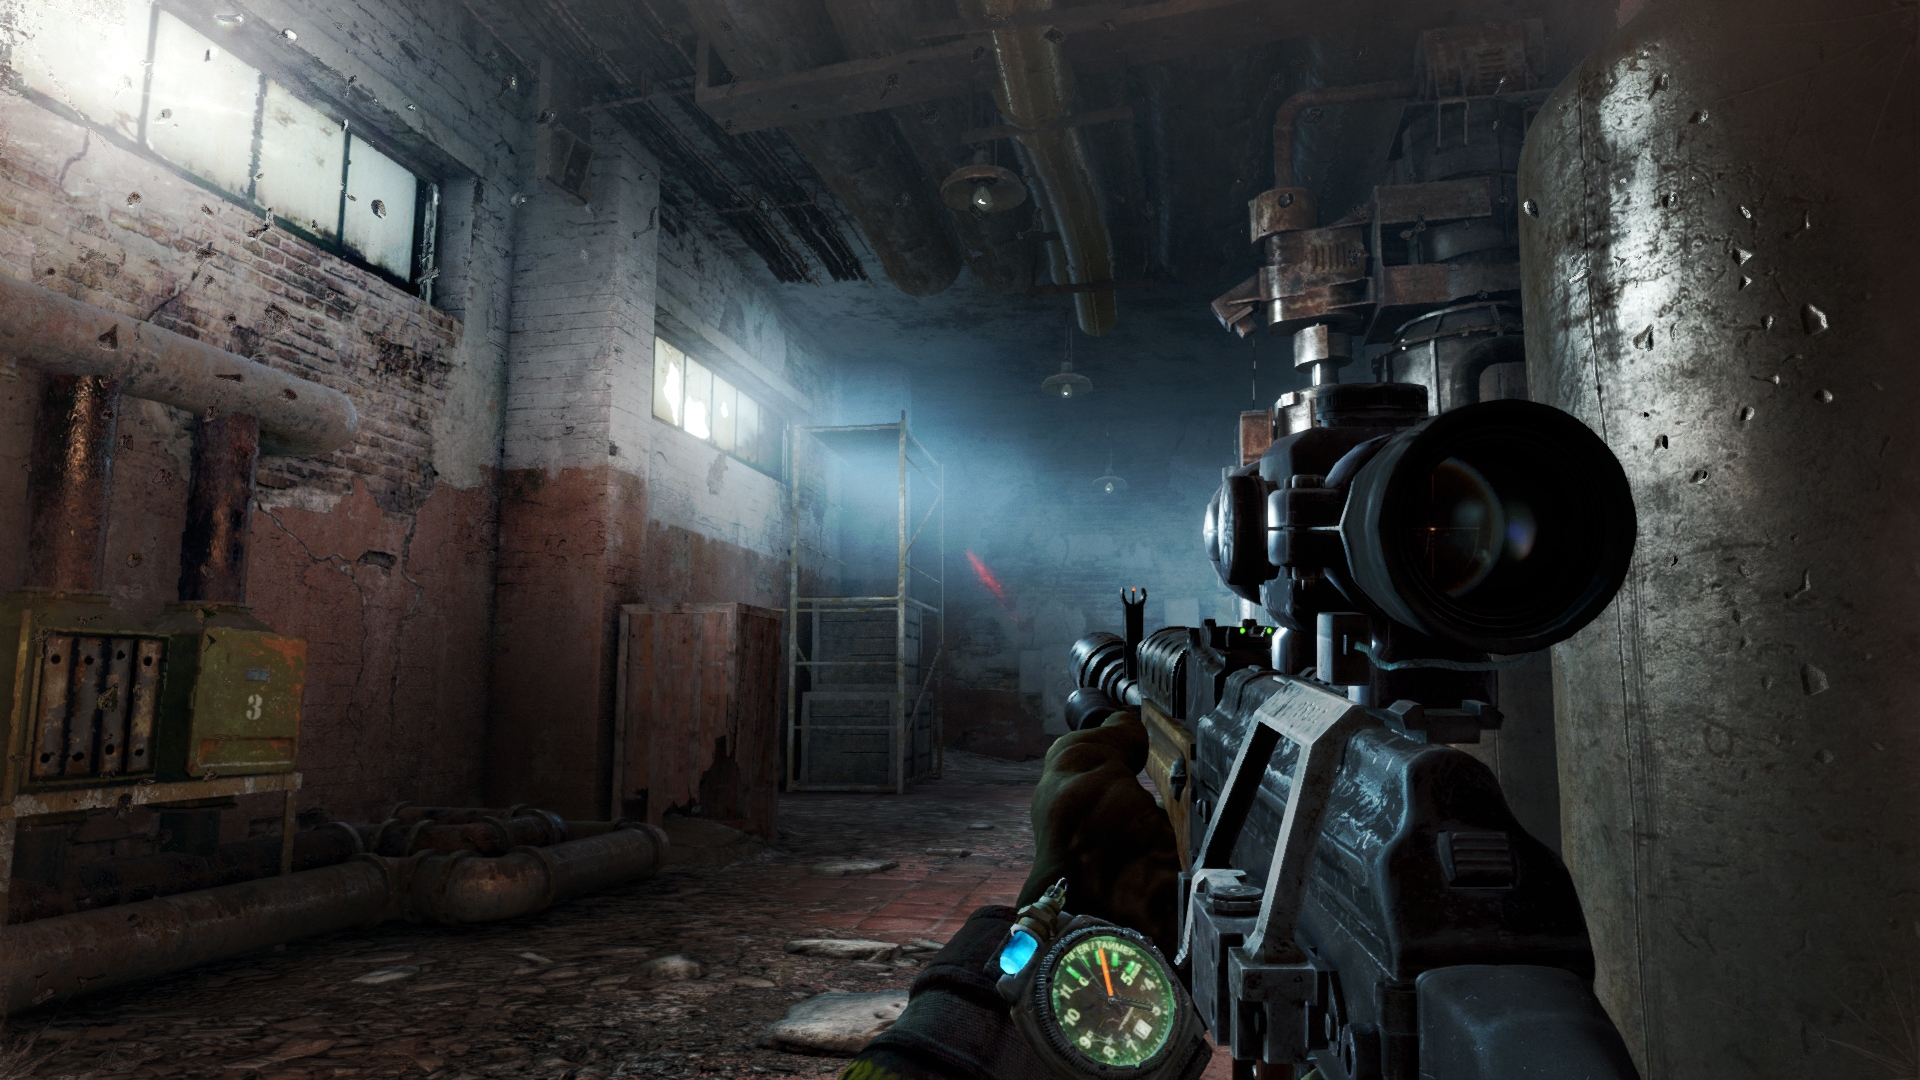 A thrilling first-person shooter with a post-nuclear war Moscow Metro setting is Metro: Last Light. Based on Metro Last Light Redux moral points and your...